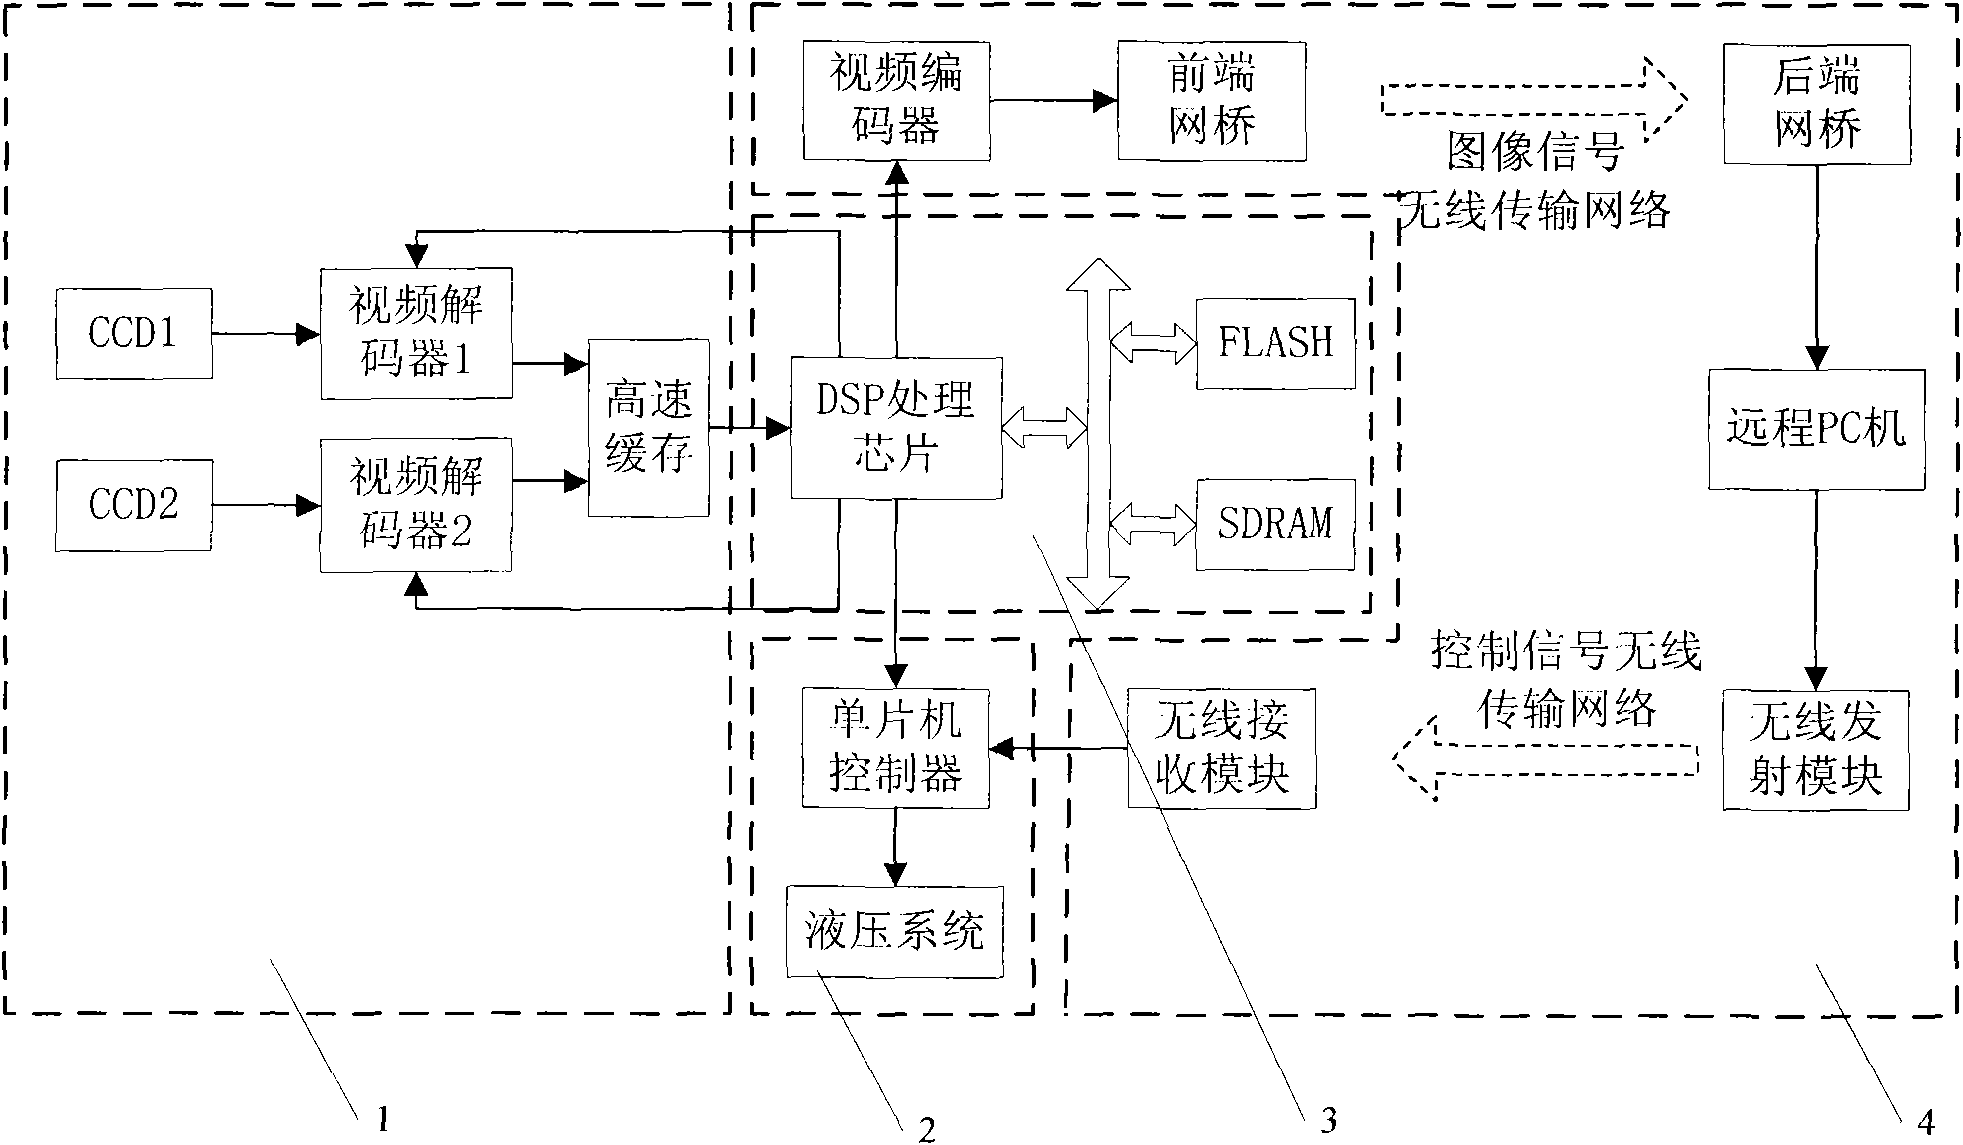 Navigation and remote monitoring system for miniature agricultural machine based on DSP (Digital Signal Processor) and binocular vision